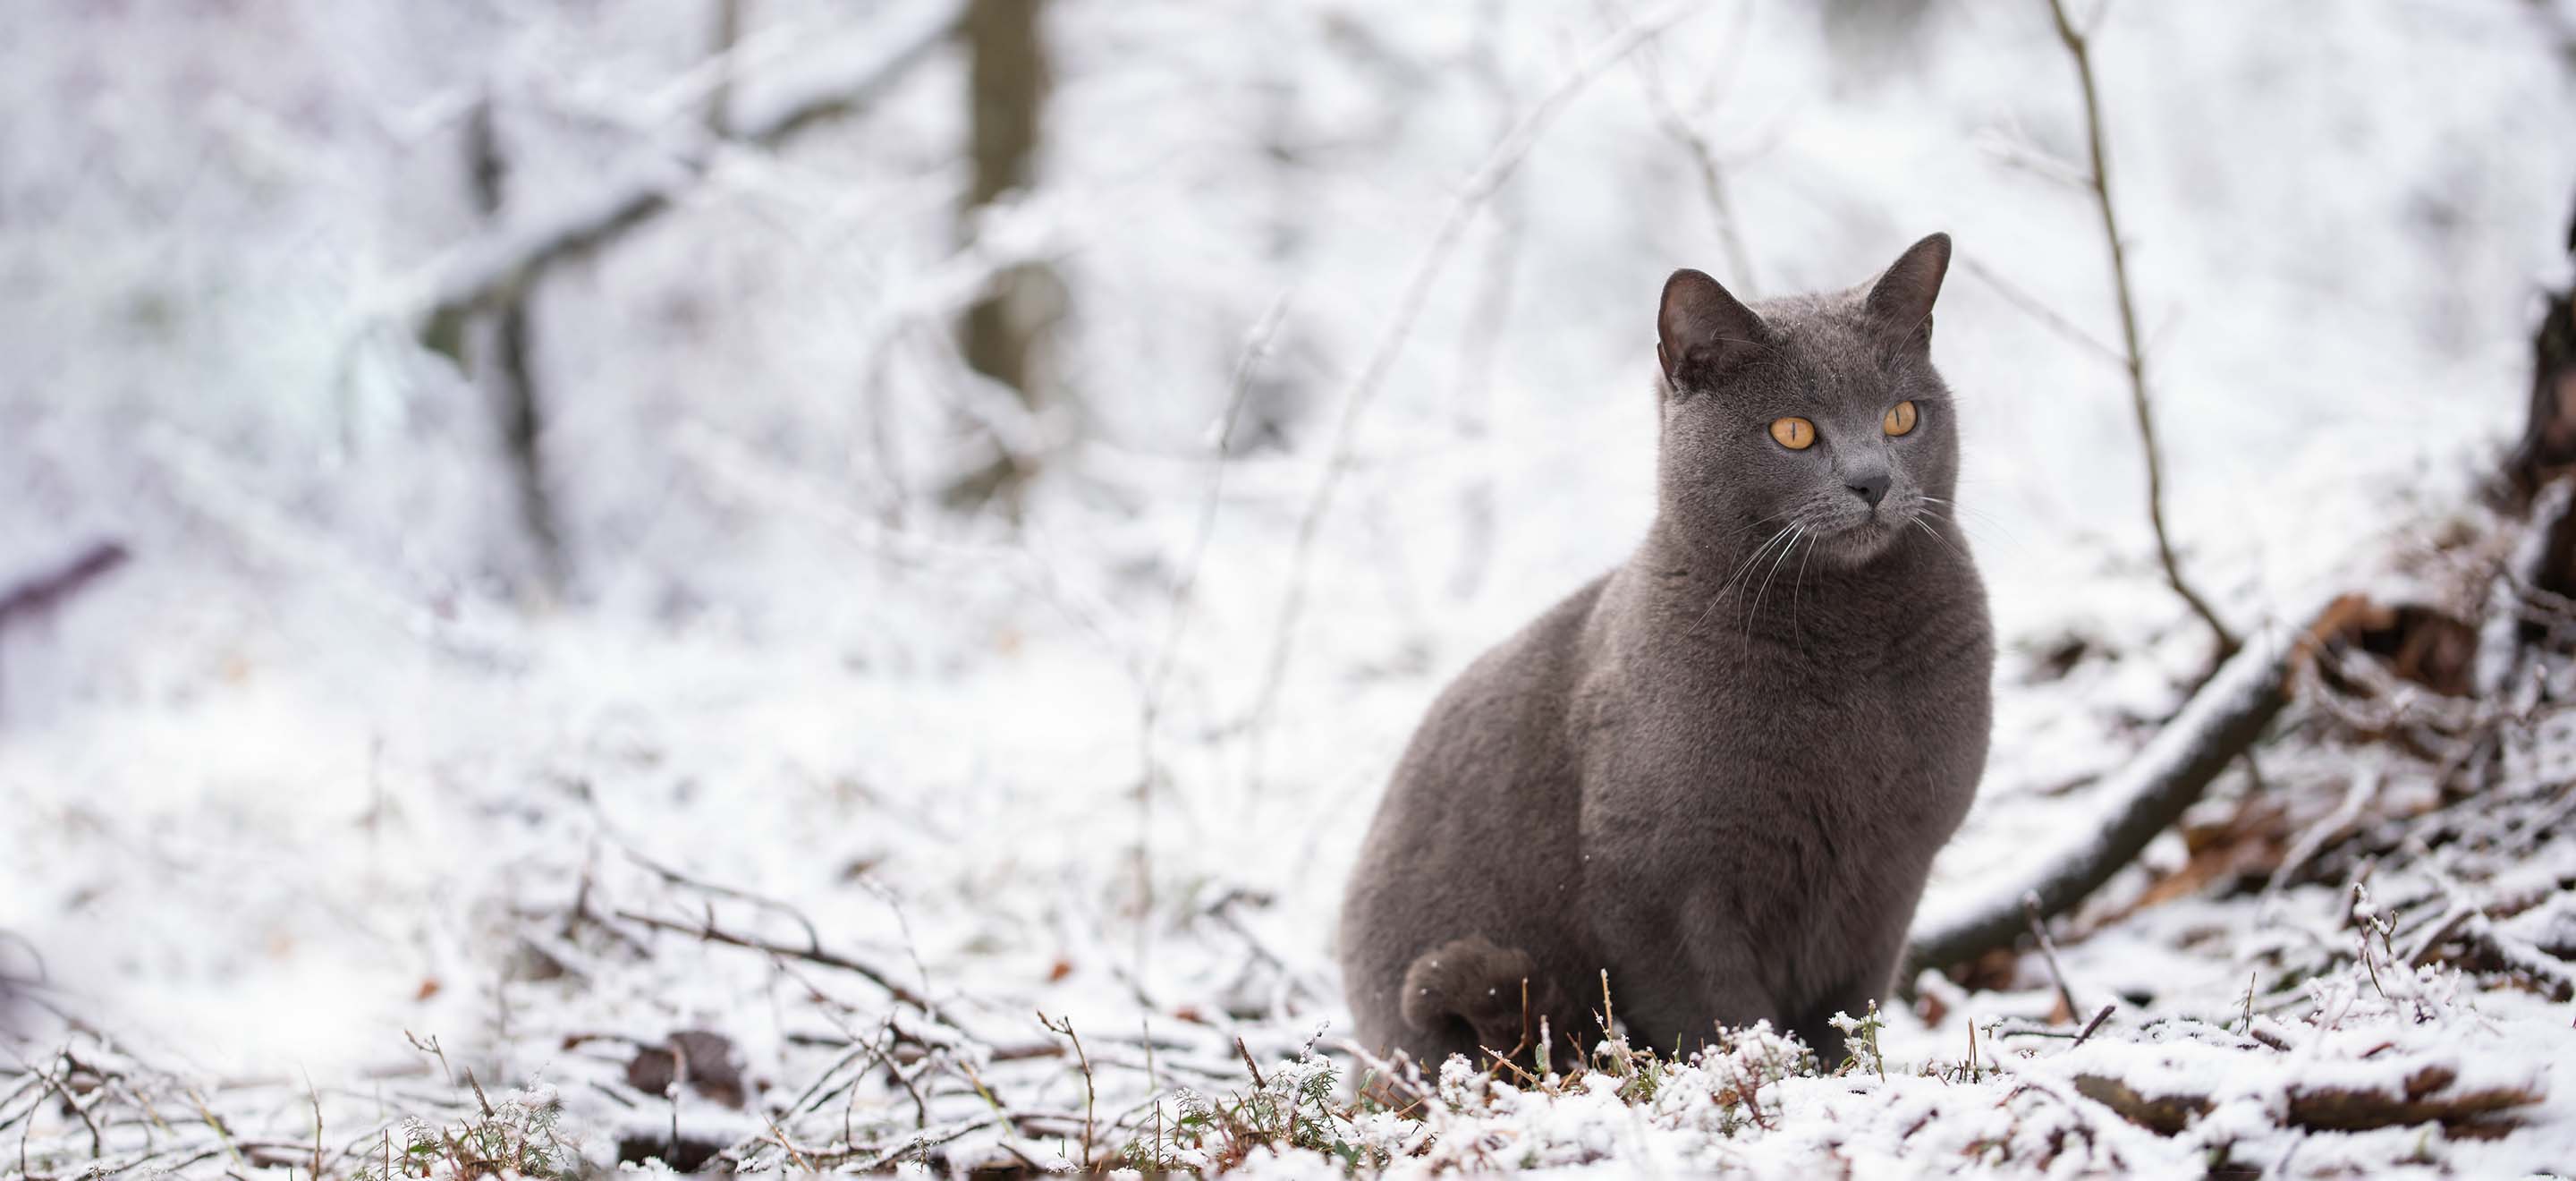 Gray cat sitting on branches in a snow covered forest image